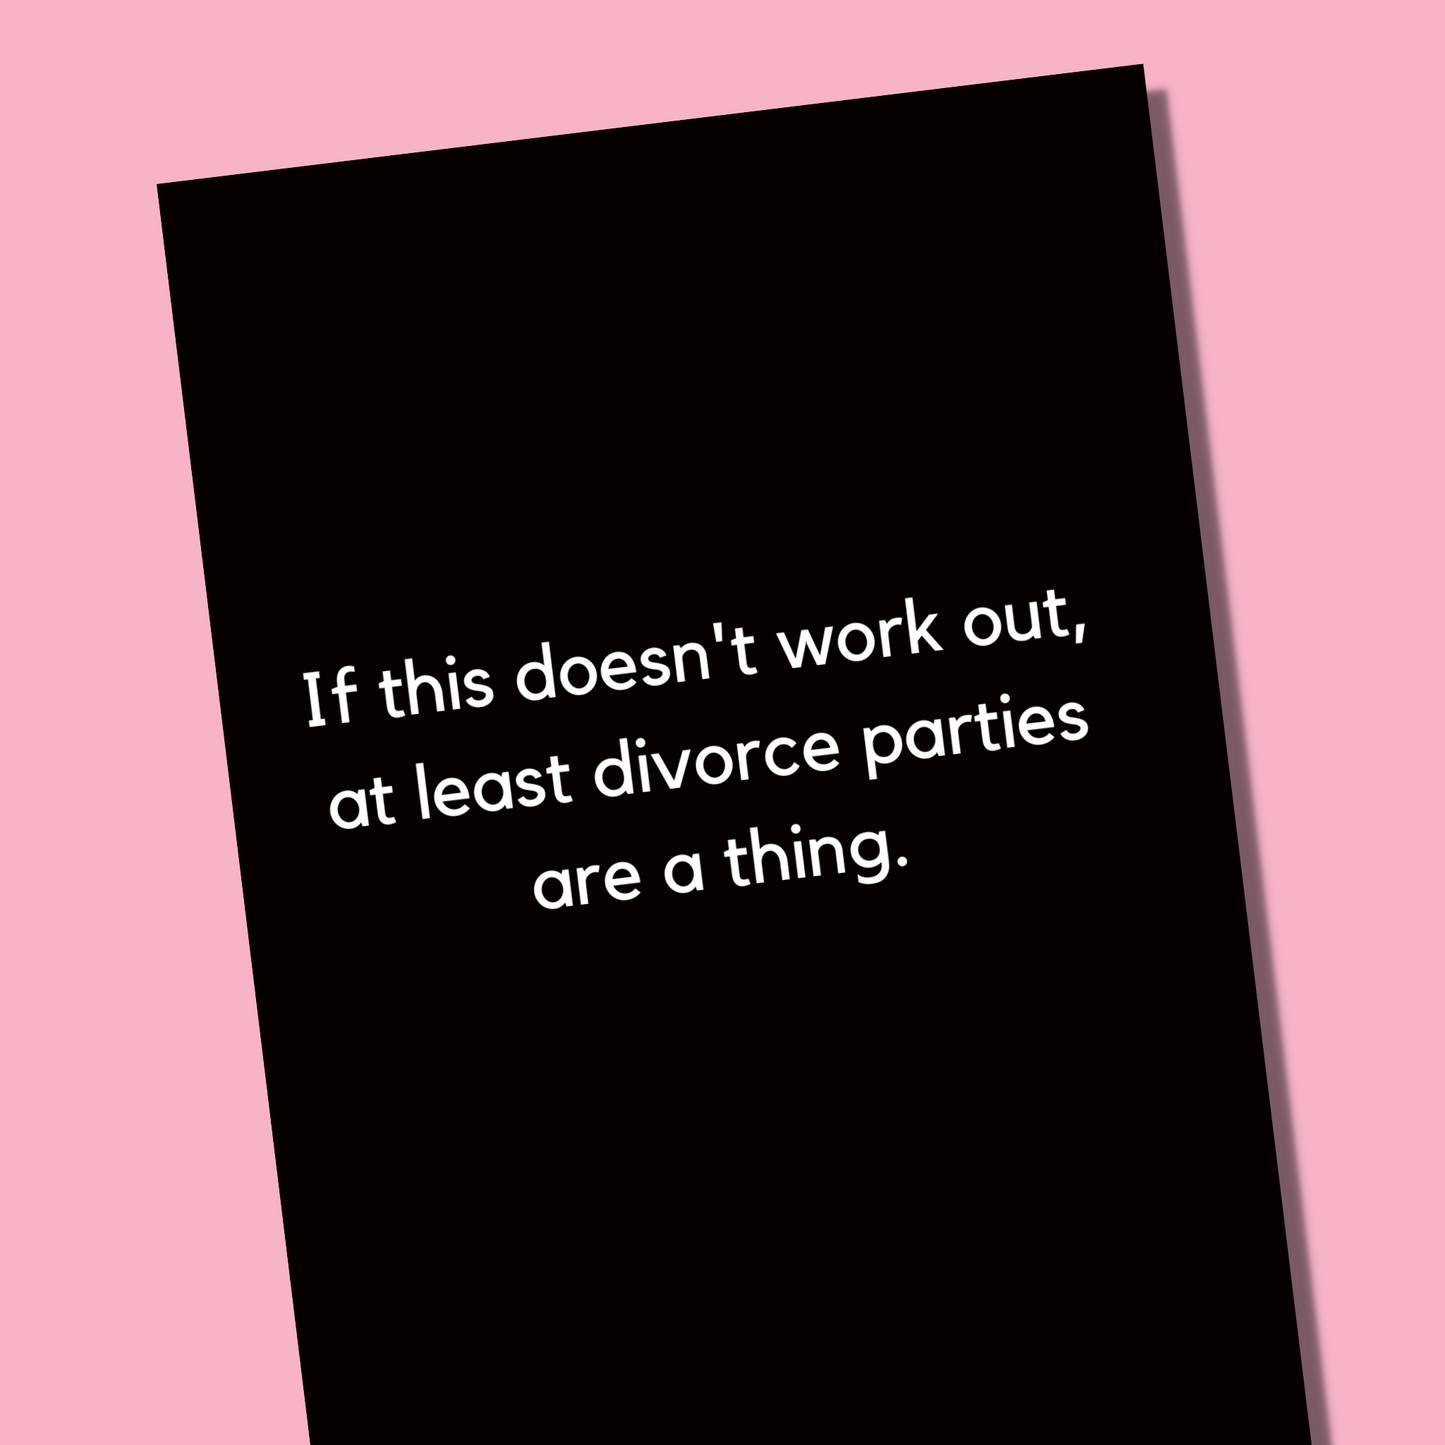 A bitchy wedding card that says "If this doesn't work out, divorce parties are a thing." The card is black with white text.